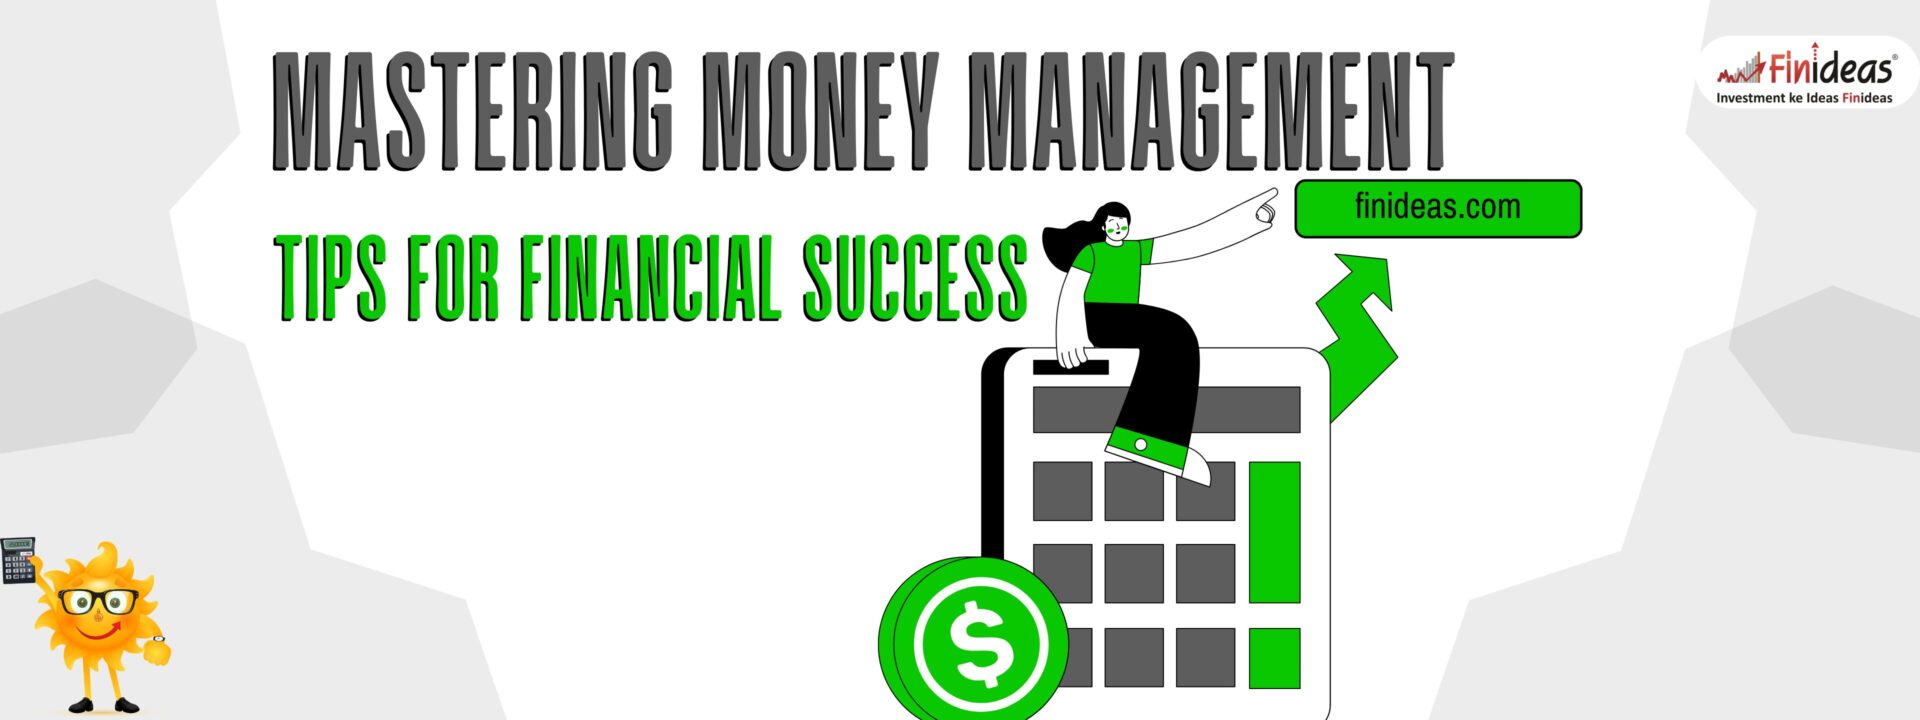 Mastering Money Management: Tips for Financial Success